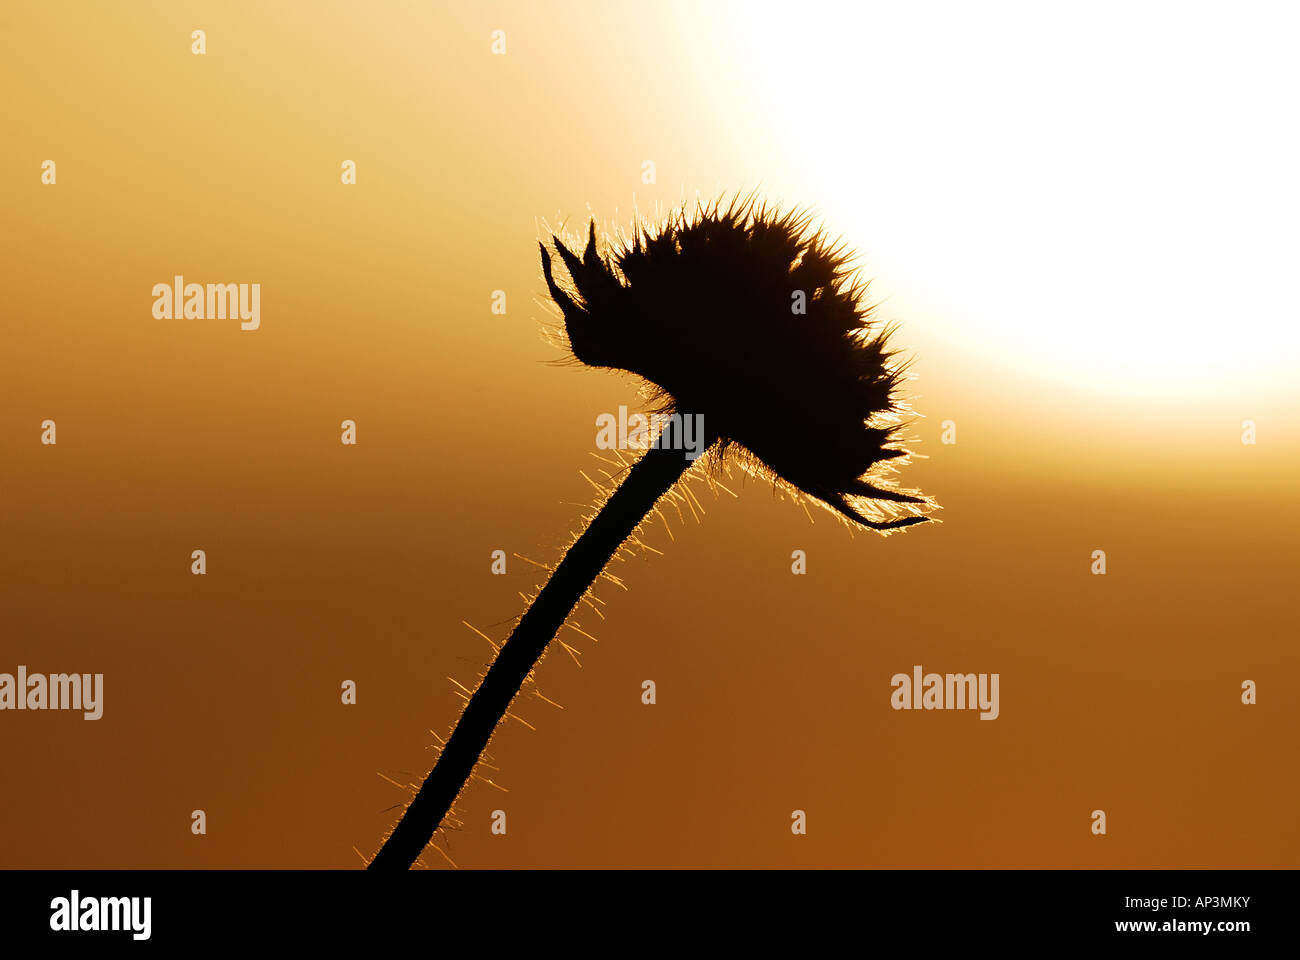 Silhouette of dandelion flower and stem on sunny day Stock Photo